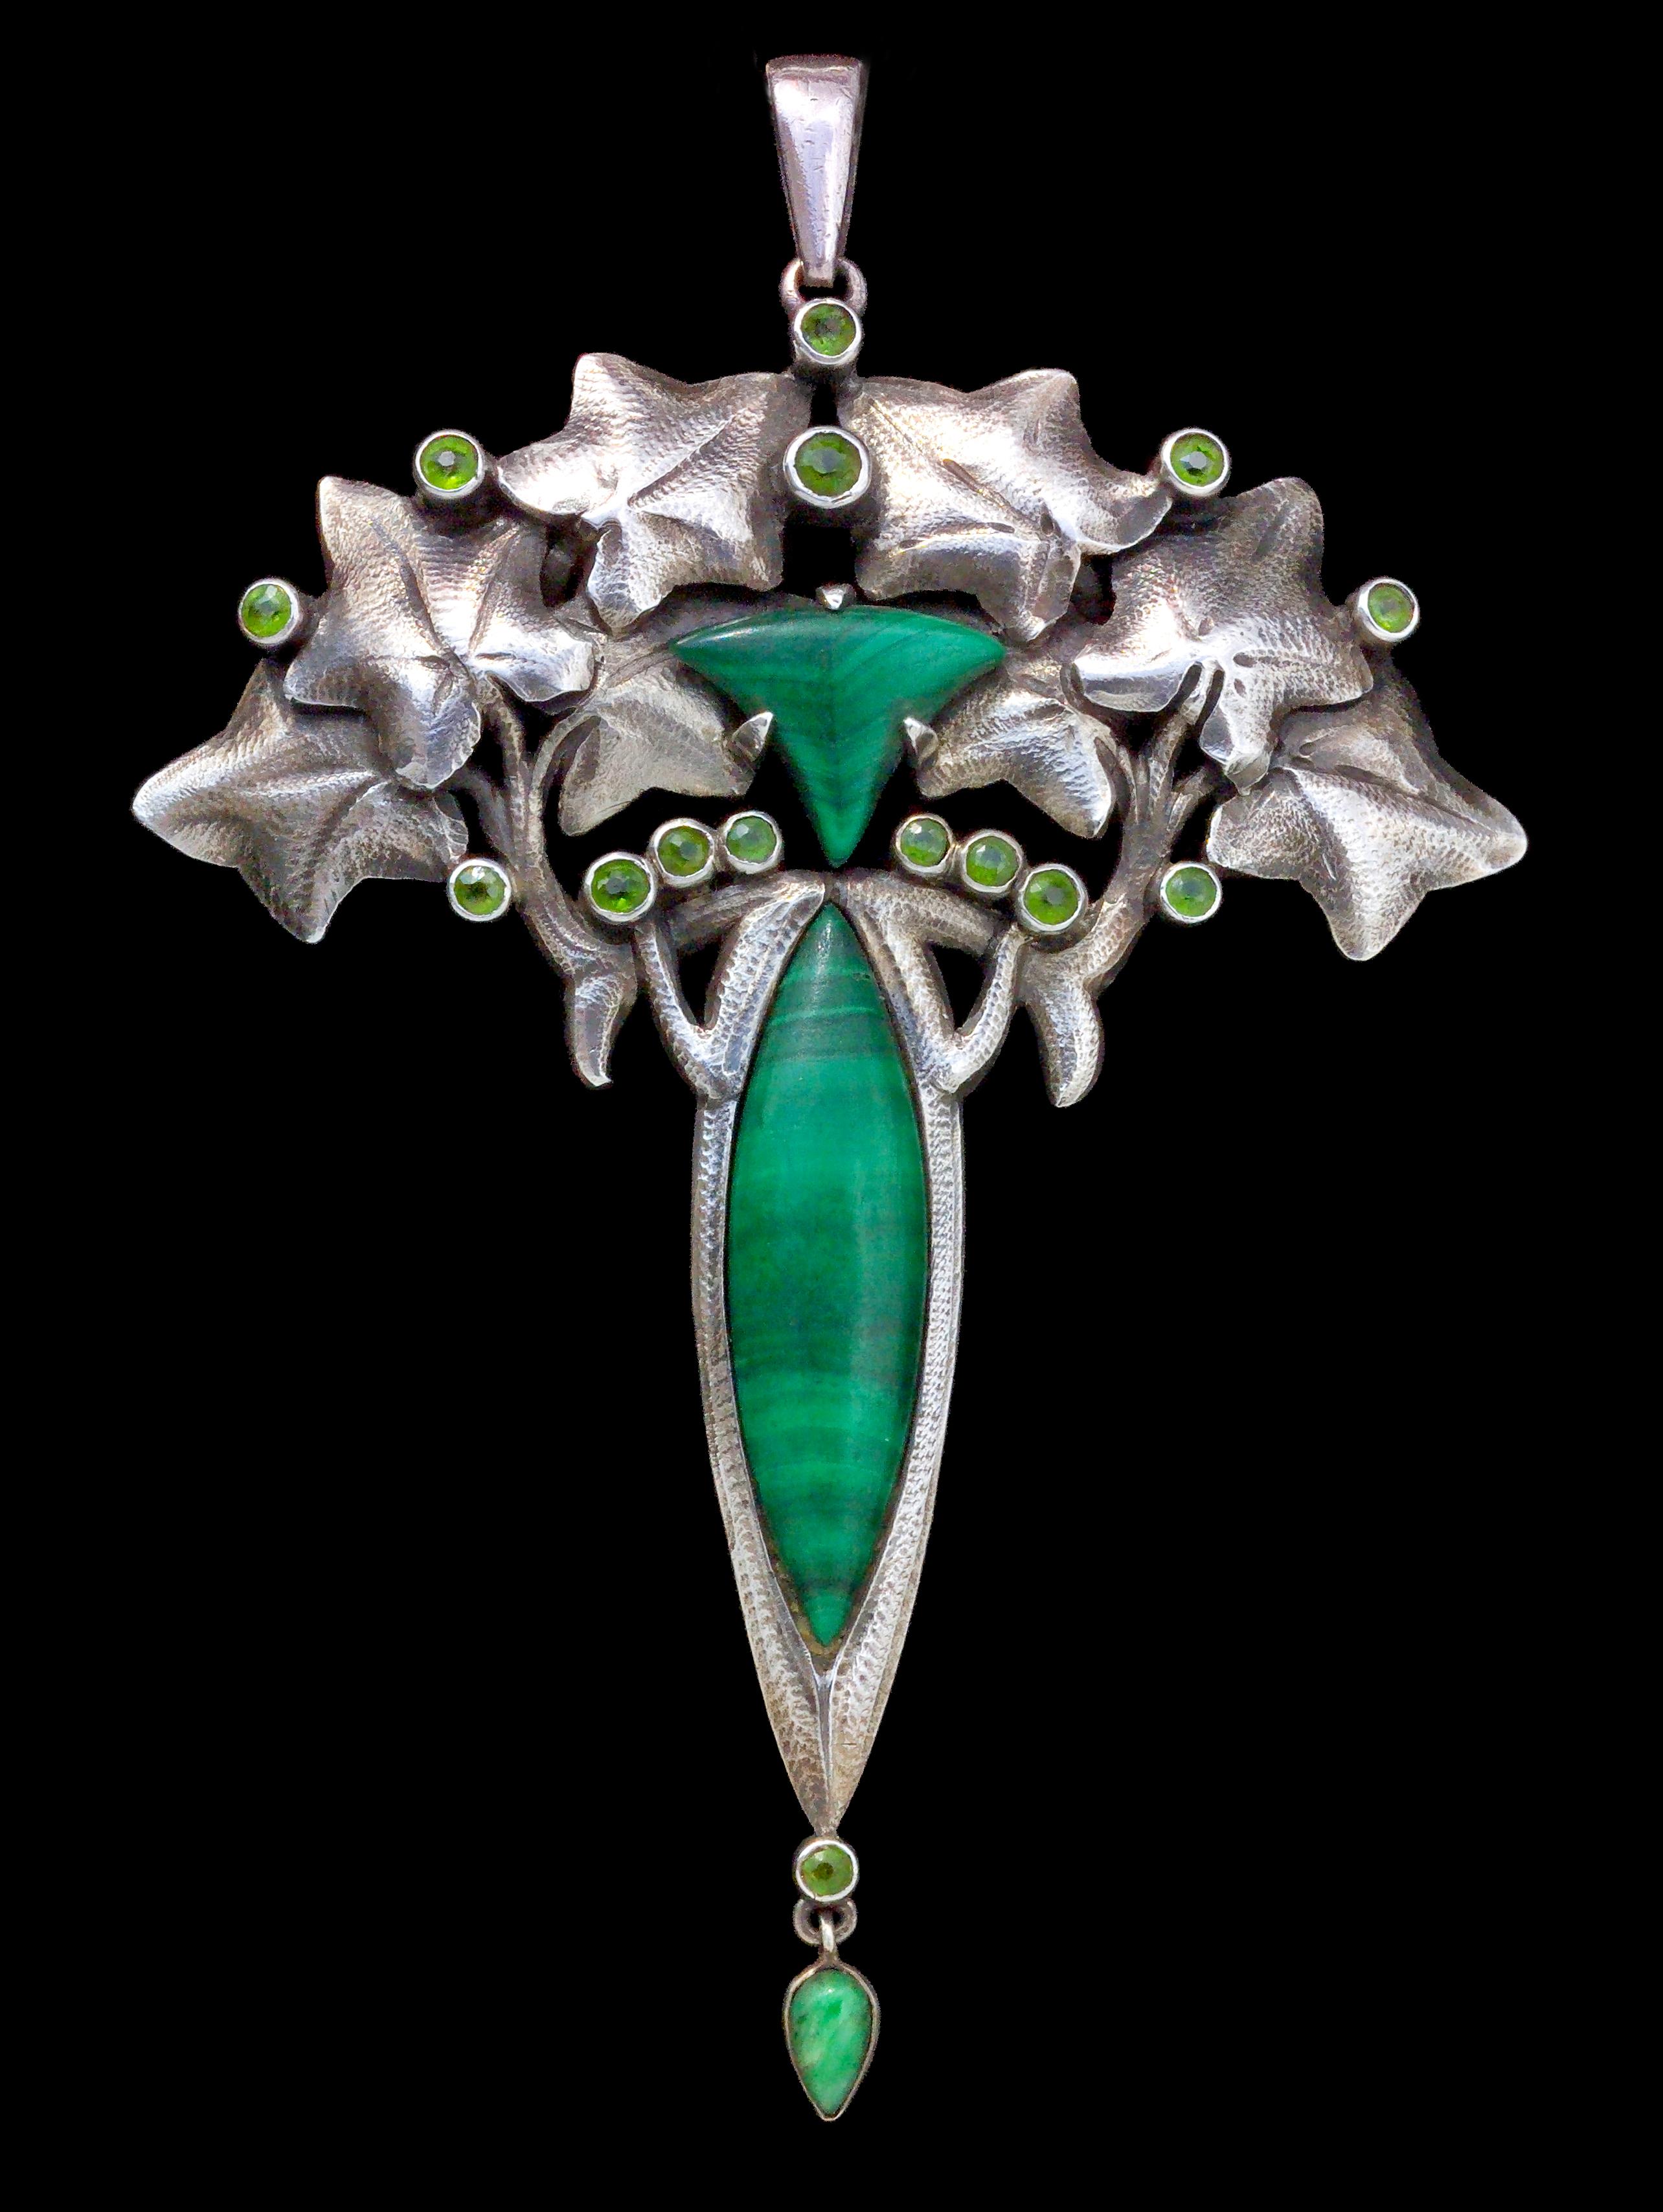 Illustrated in our book:
Beatriz Chadour-Sampson & Sonya Newell-Smith, Tadema Gallery London Jewellery from the 1860s to 1960s, Arnoldsche Art Publishers, Stuttgart 2021, cat. no. 41
A good French Art Nouveau pendant in the manner of Lucien Gaillard